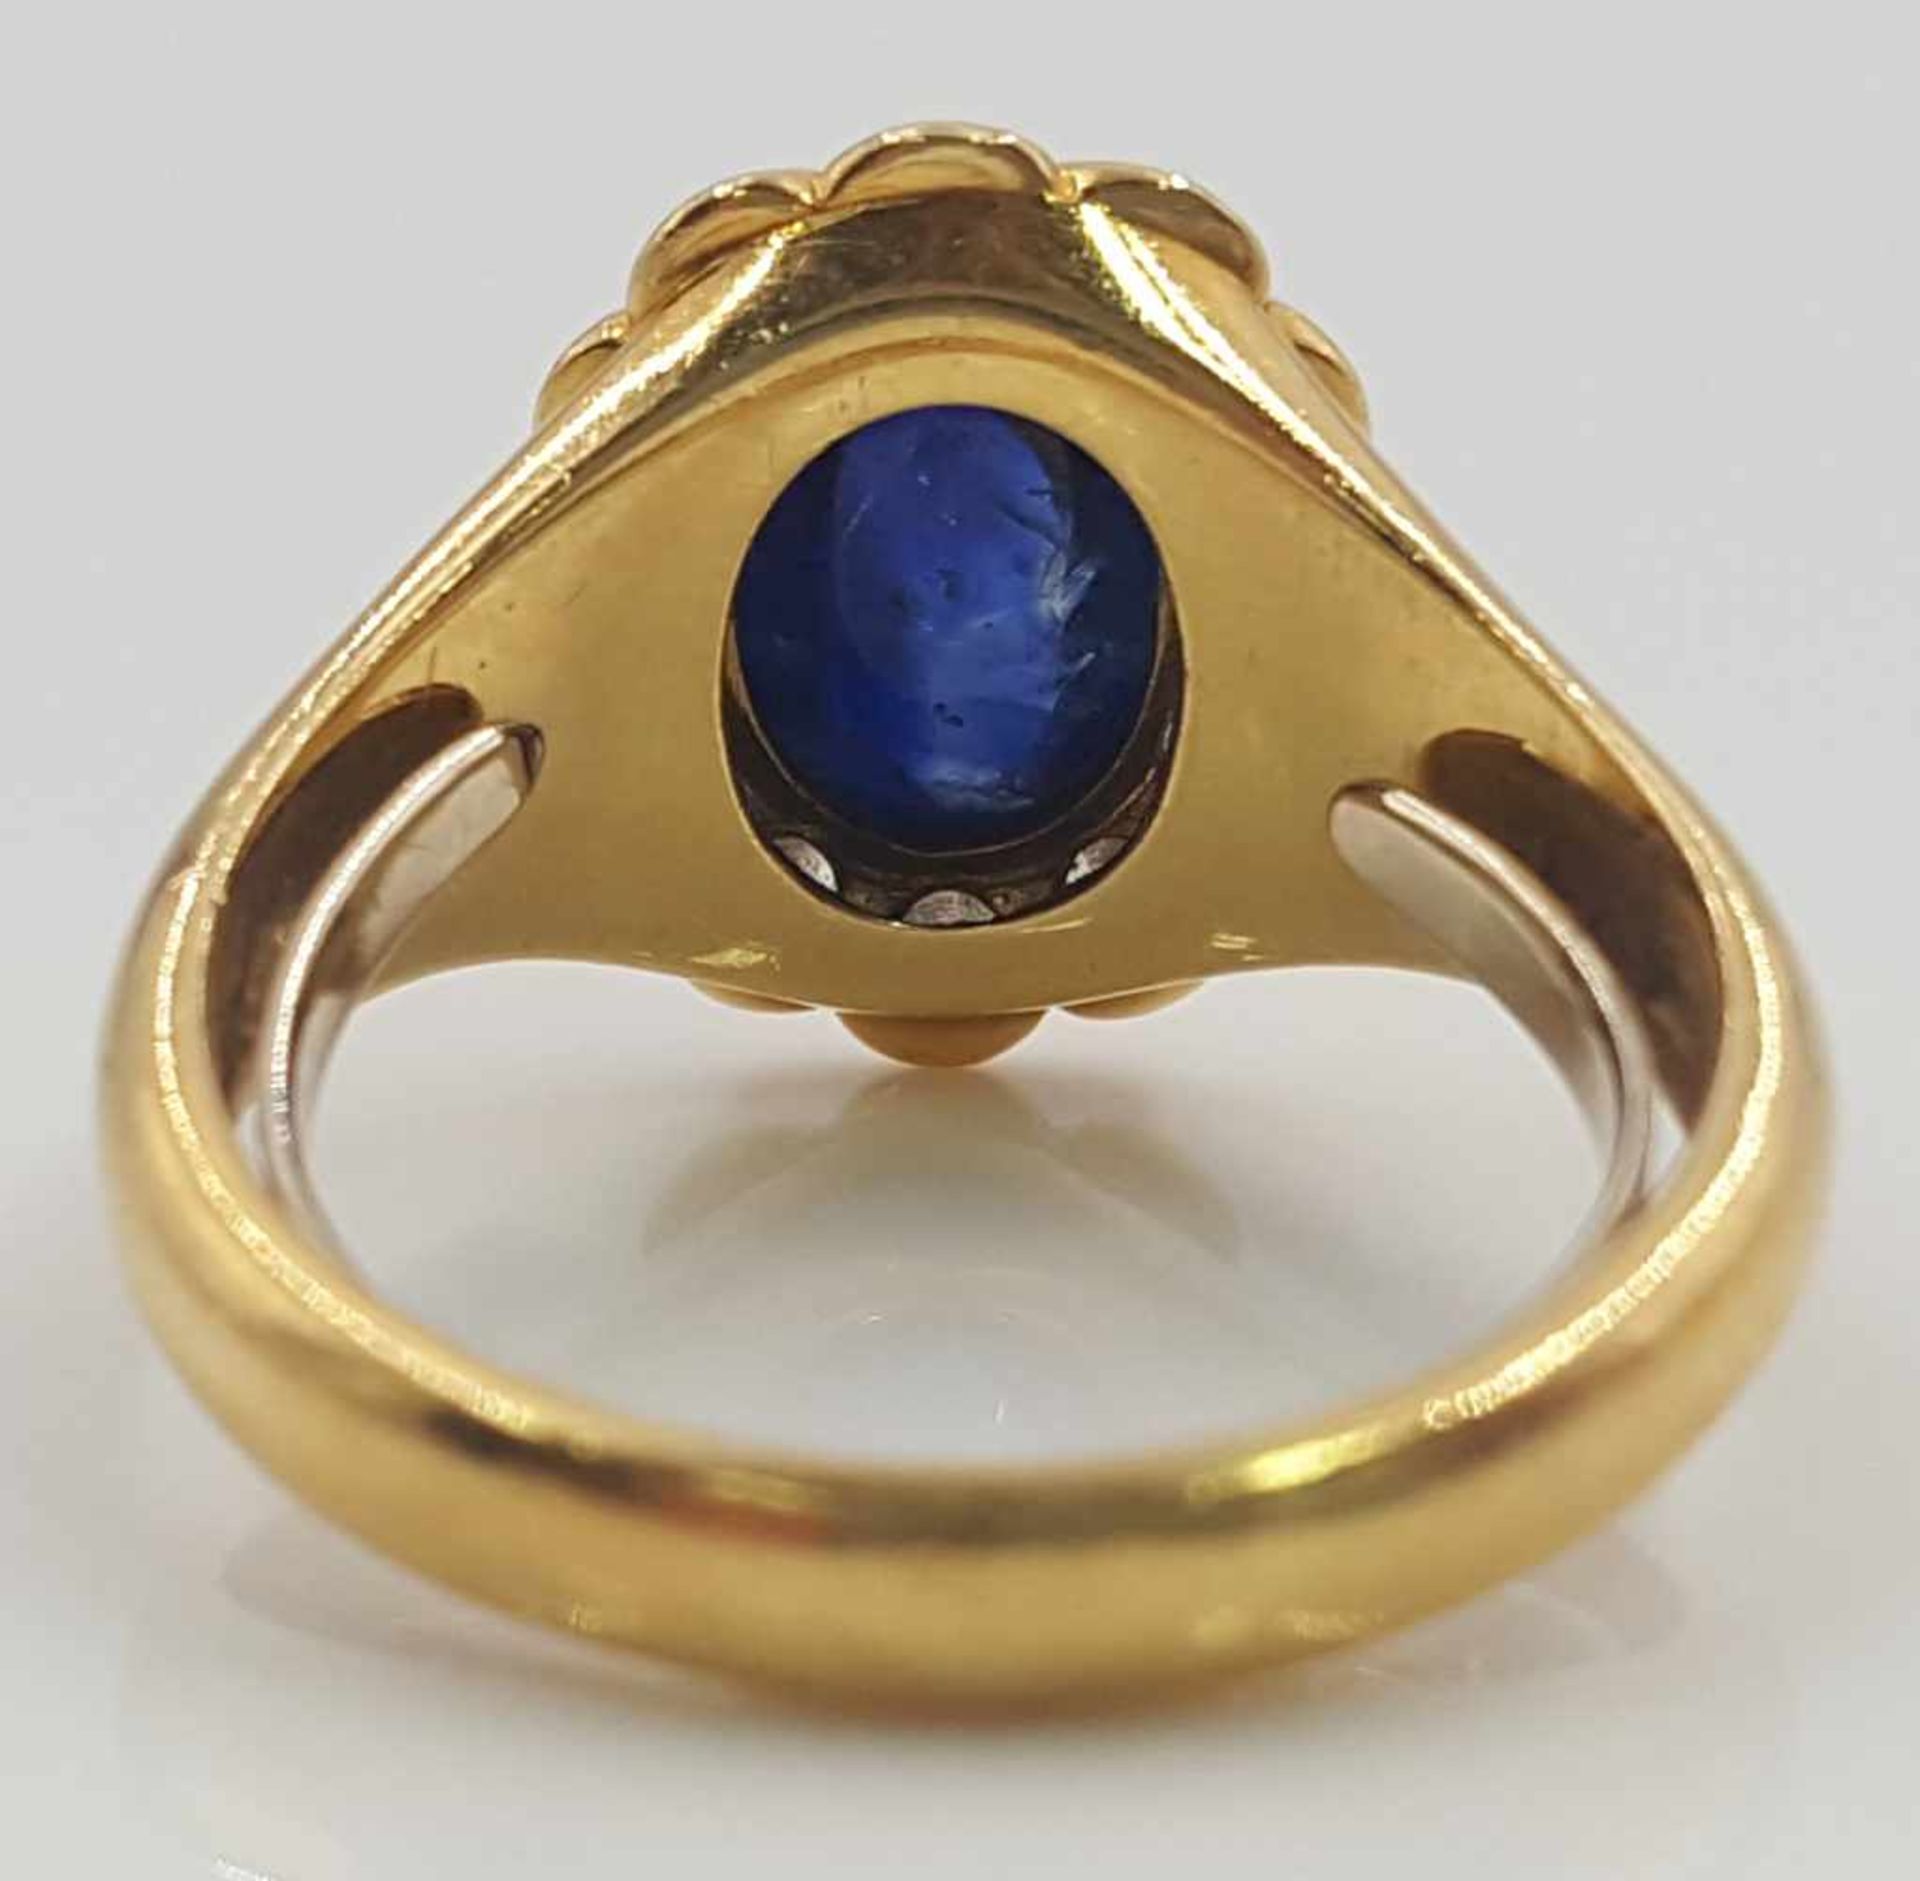 Yellow gold 750 ring with a Sapphire cabochon framed by 12 diamonds. - Image 2 of 7